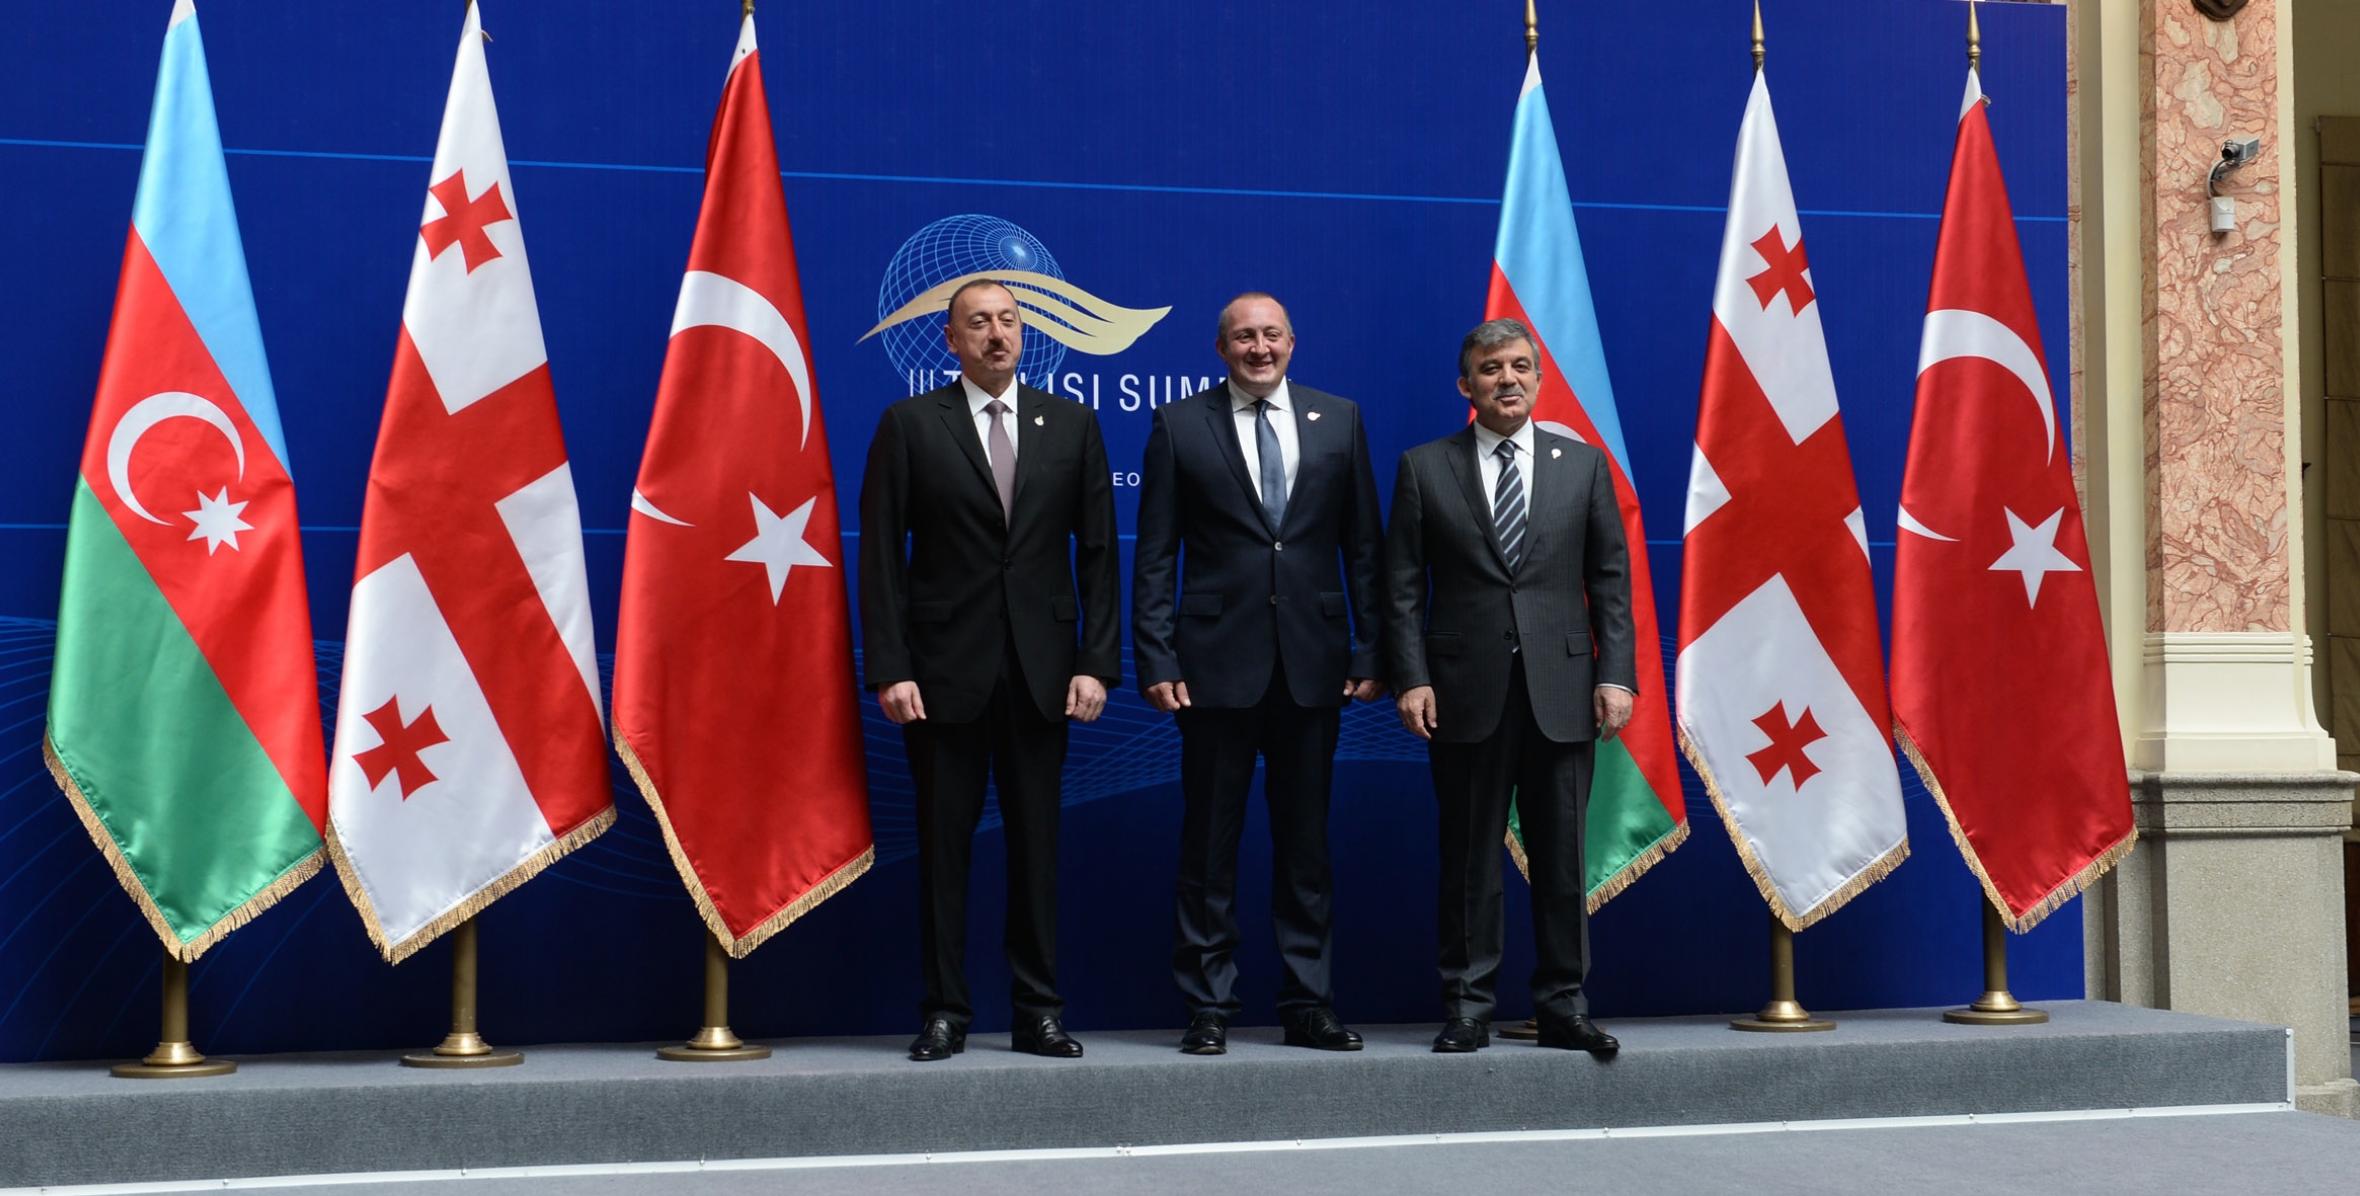 Trilateral summit of the presidents of Azerbaijan, Georgia and Turkey was held in Tbilisi